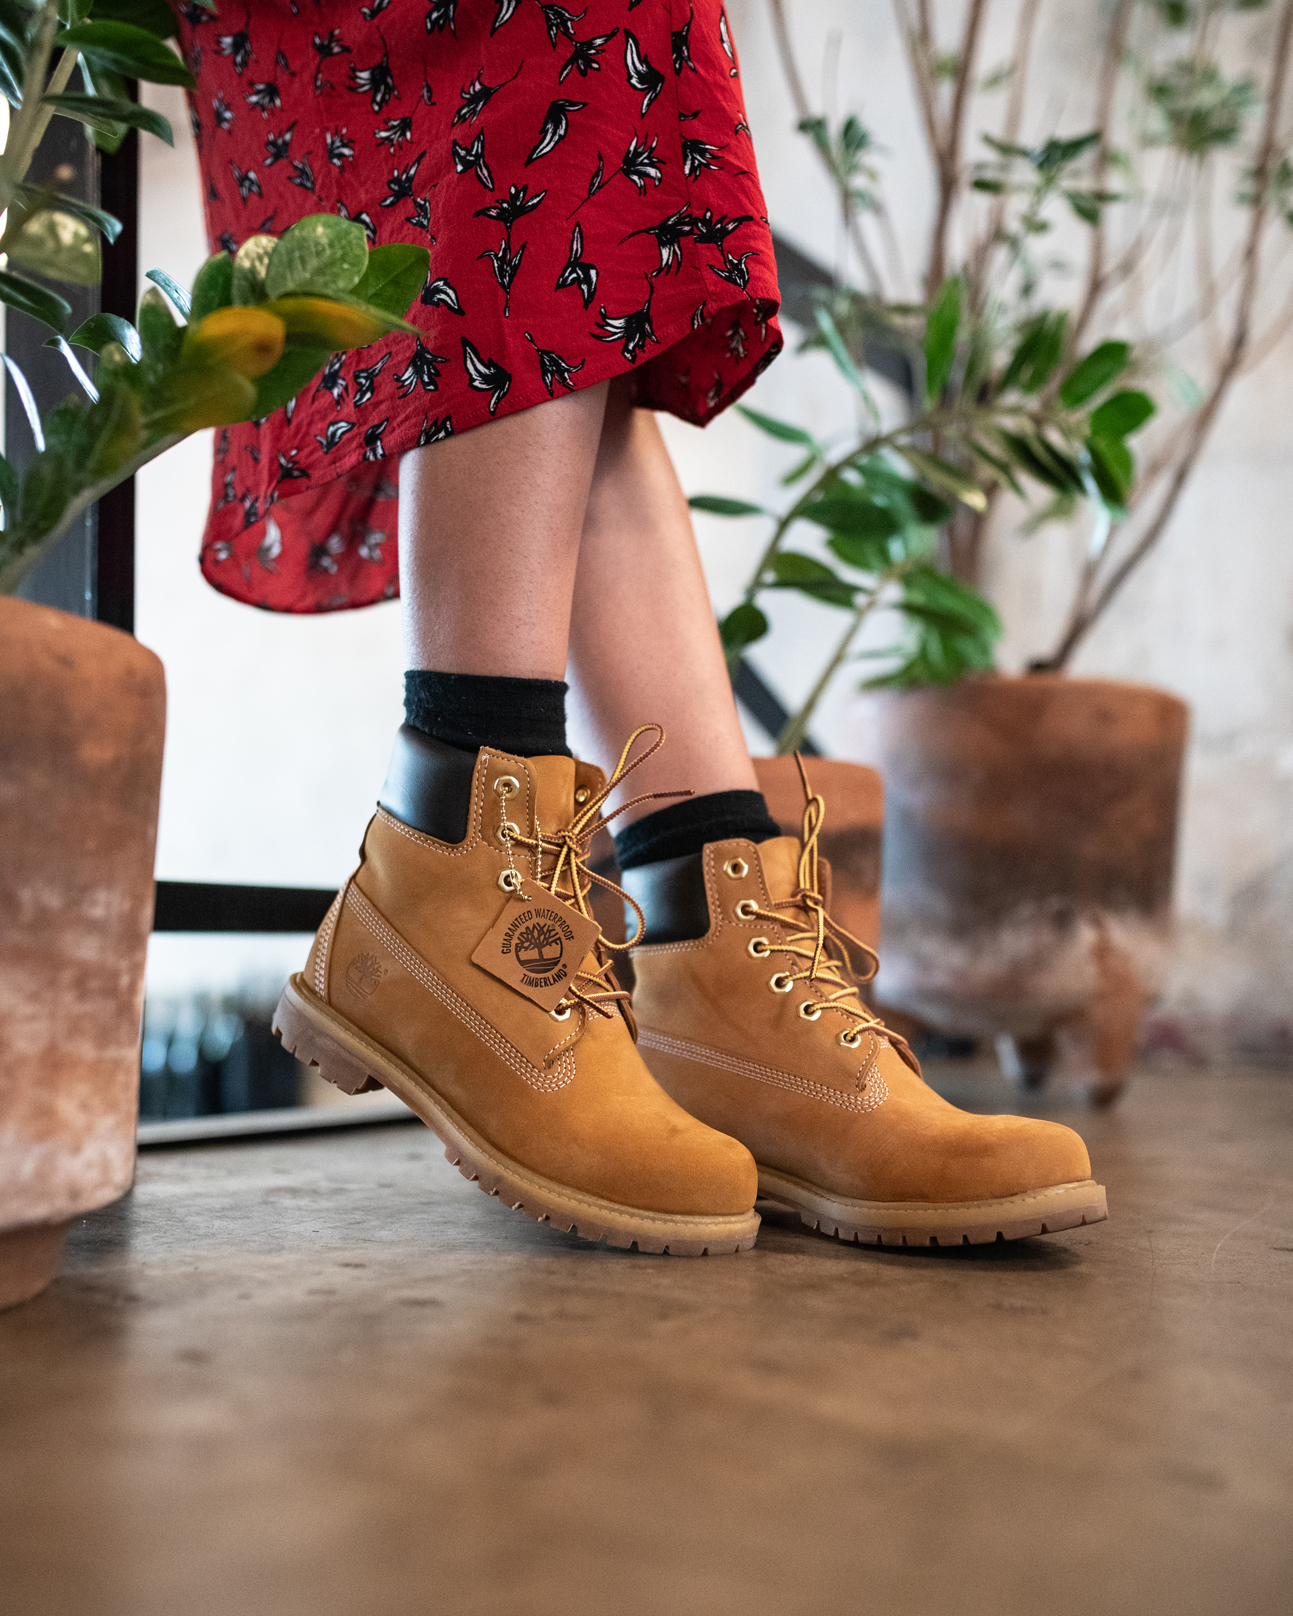 levend Aanval Manga Timberland México on Twitter: "El Outfit de hoy con Timbs. ¿Ustedes con qué  las combinan? #timberland #timberlandmx https://t.co/iDPnhZqkGh" / Twitter